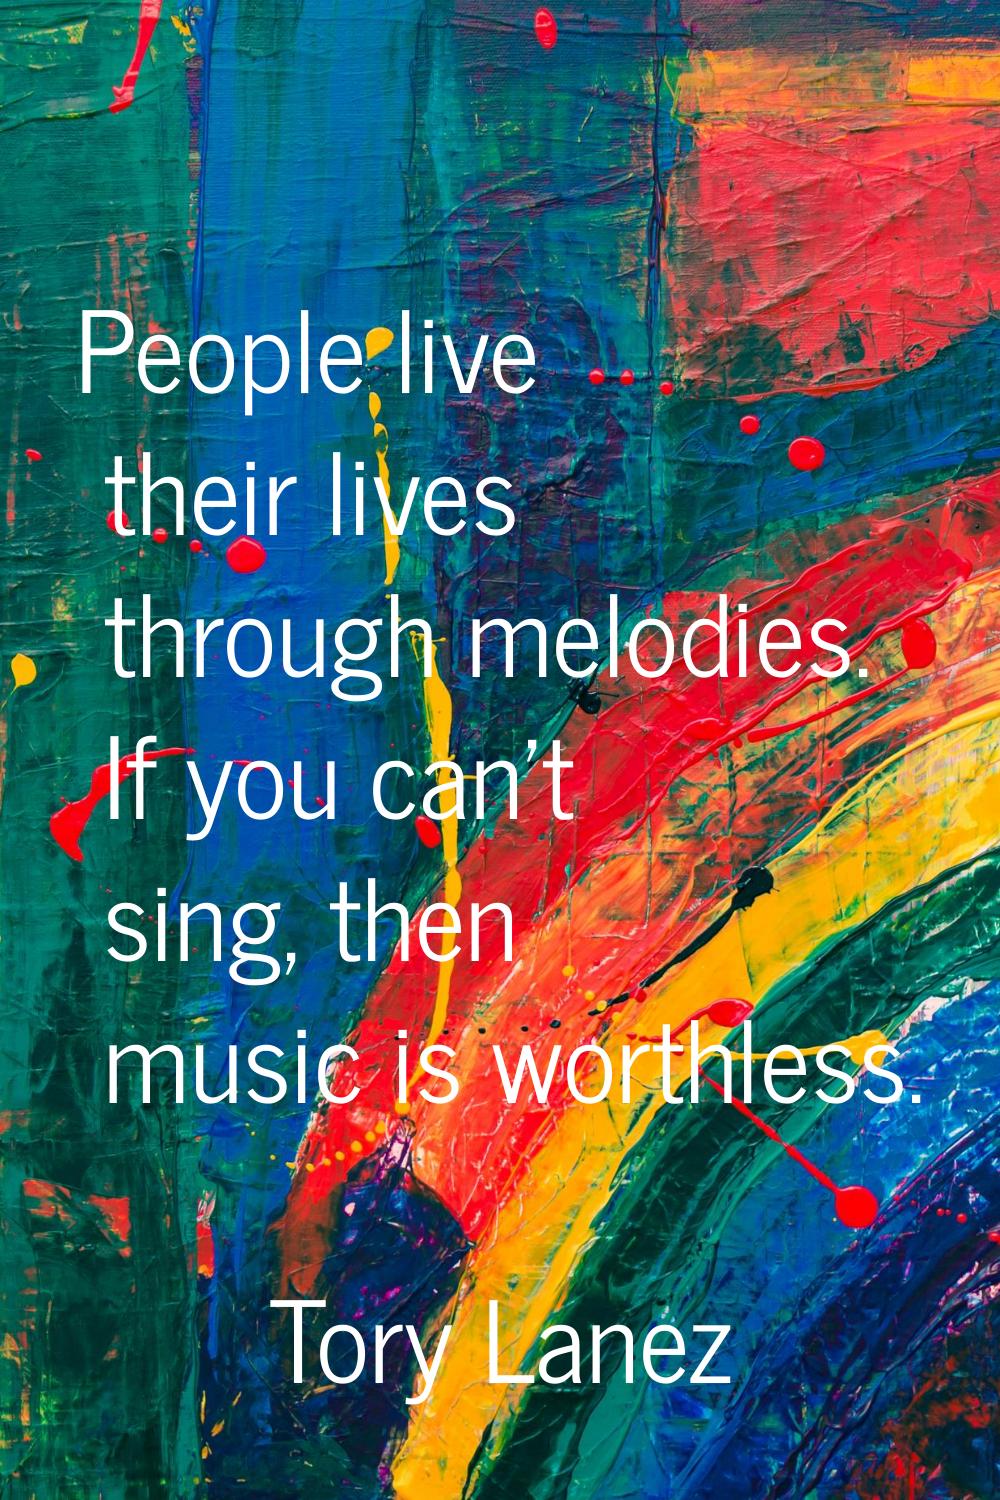 People live their lives through melodies. If you can't sing, then music is worthless.